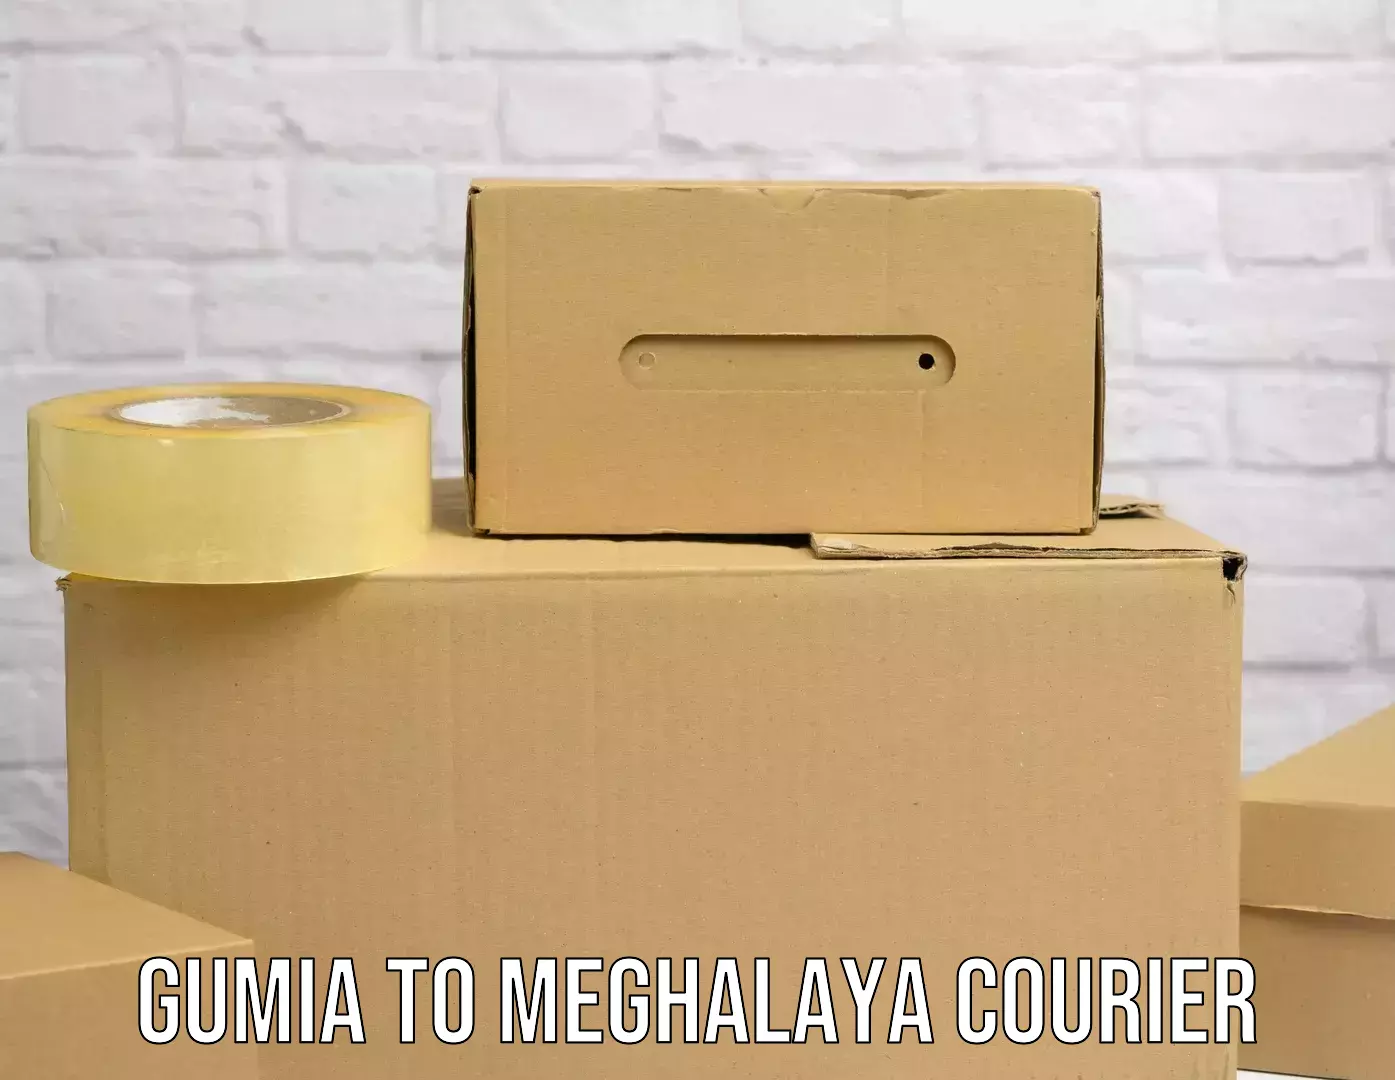 Full-service courier options Gumia to Cherrapunji